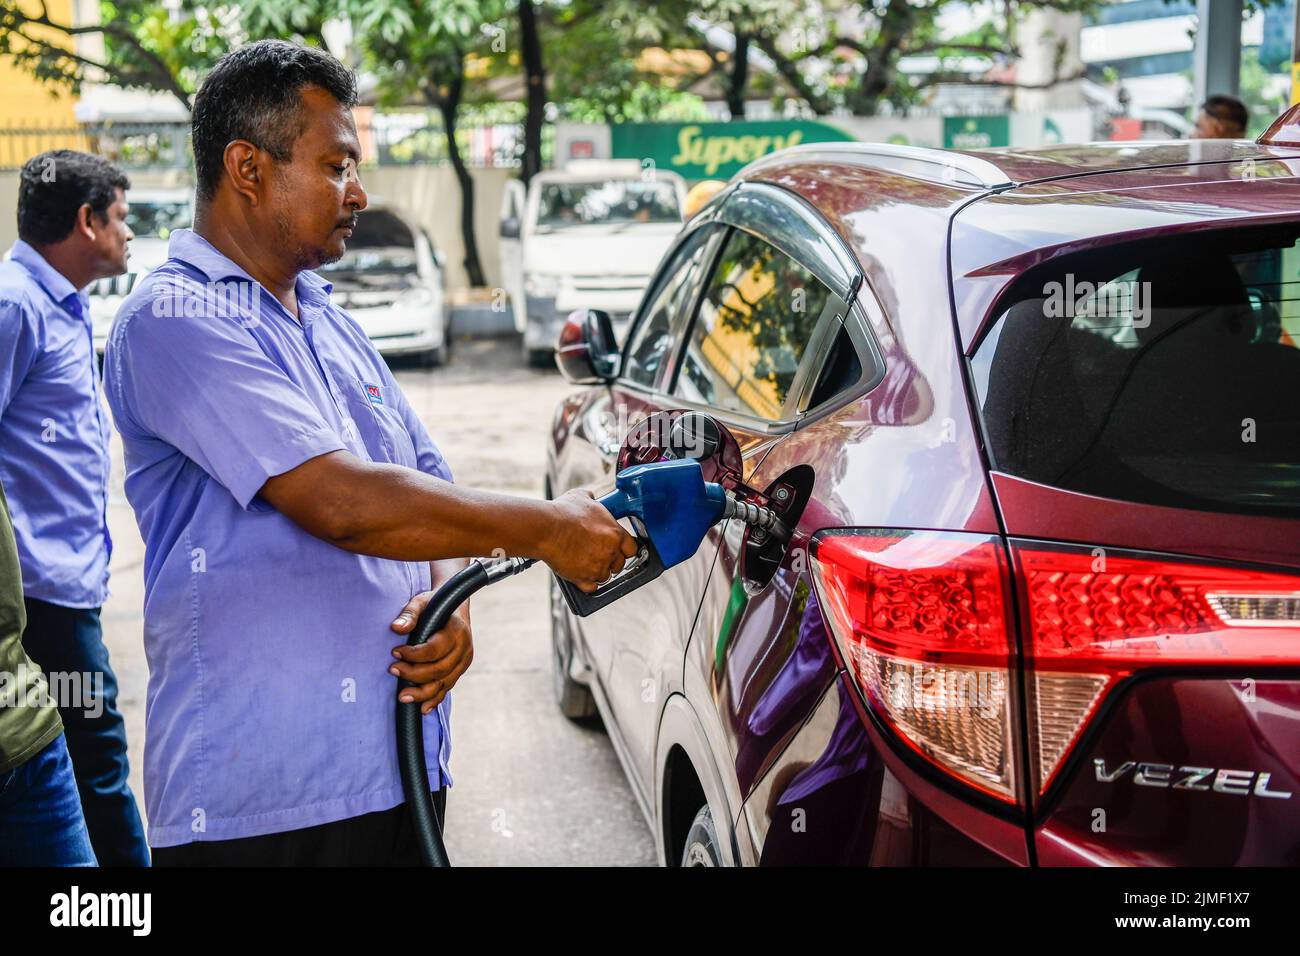 A pump attendant refuels a car at a Petrol station in Dhaka. The government has increased fuel oil prices by 42.5% to 51.6%, highest in 20 years, dealing a big blow to people already overwhelmed by skyrocketing prices of essential goods amid record inflation. The Energy and Mineral Resources Division on Friday night hiked diesel and kerosene prices by Tk34 per litre to Tk114 and octane and petrol prices by Tk46 per litre to Tk135. The government announced the hike at a time when oil prices in the international market are on a downward trend. Brent crude price on Friday was $95.50/barrel. It ha Stock Photo